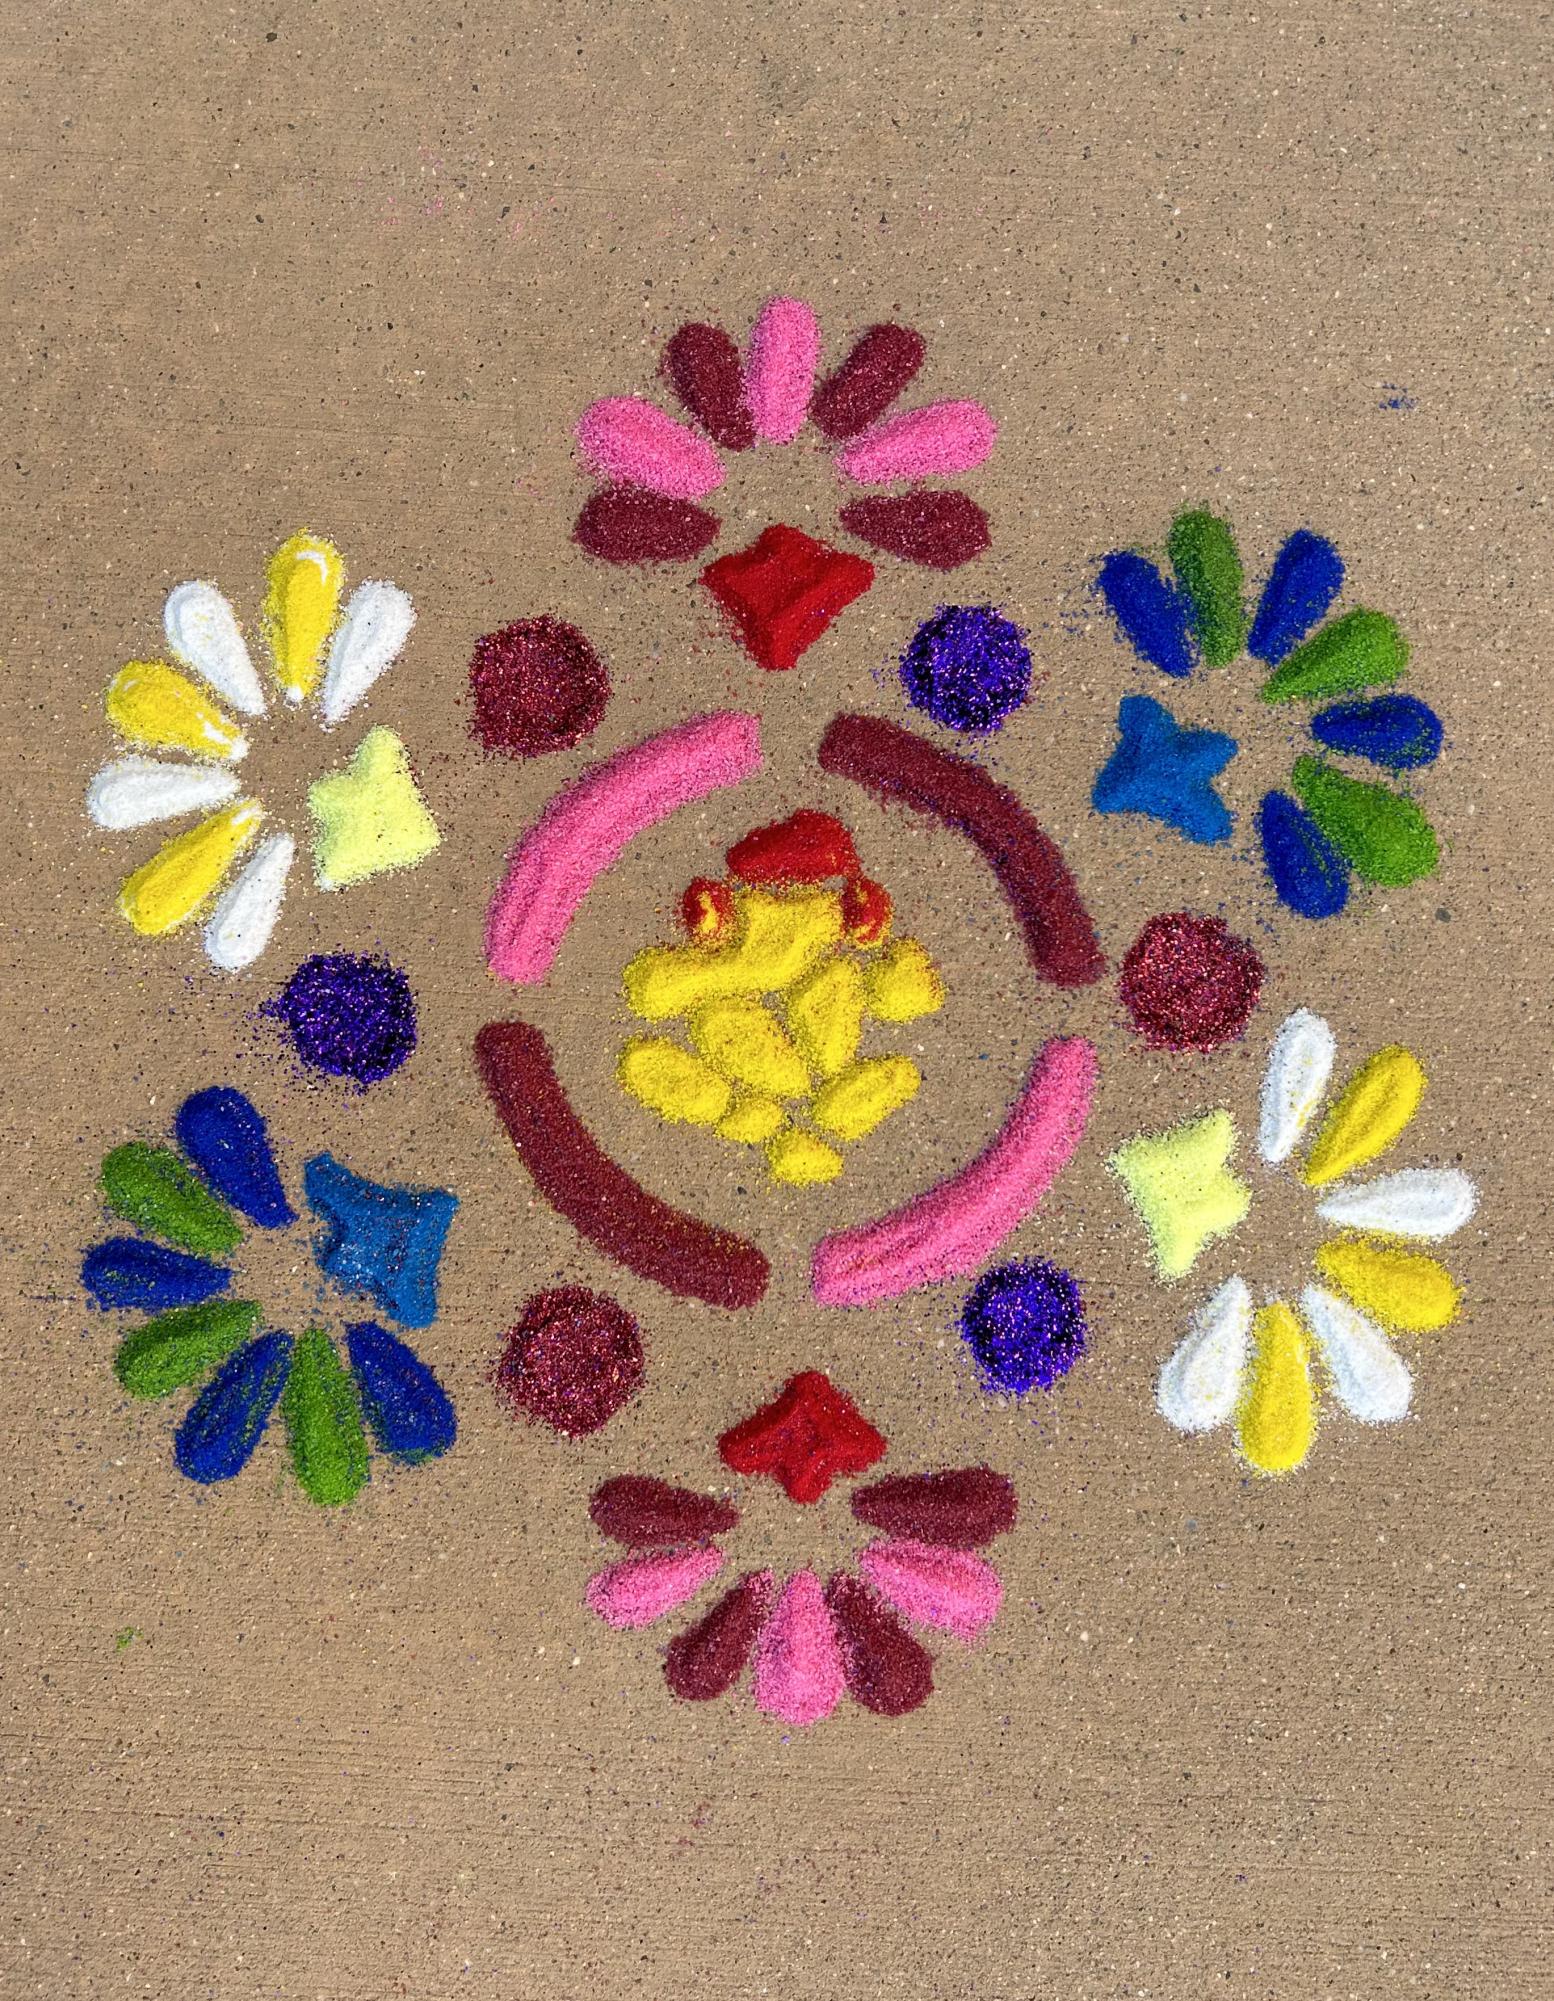 Rangolis are popular Diwali decorations made of colored sand. The designs, often formed near the entrance to a home, feature flowers, symmetrical designs and religious symbols in vibrant hues to welcome God and abundance inside. 